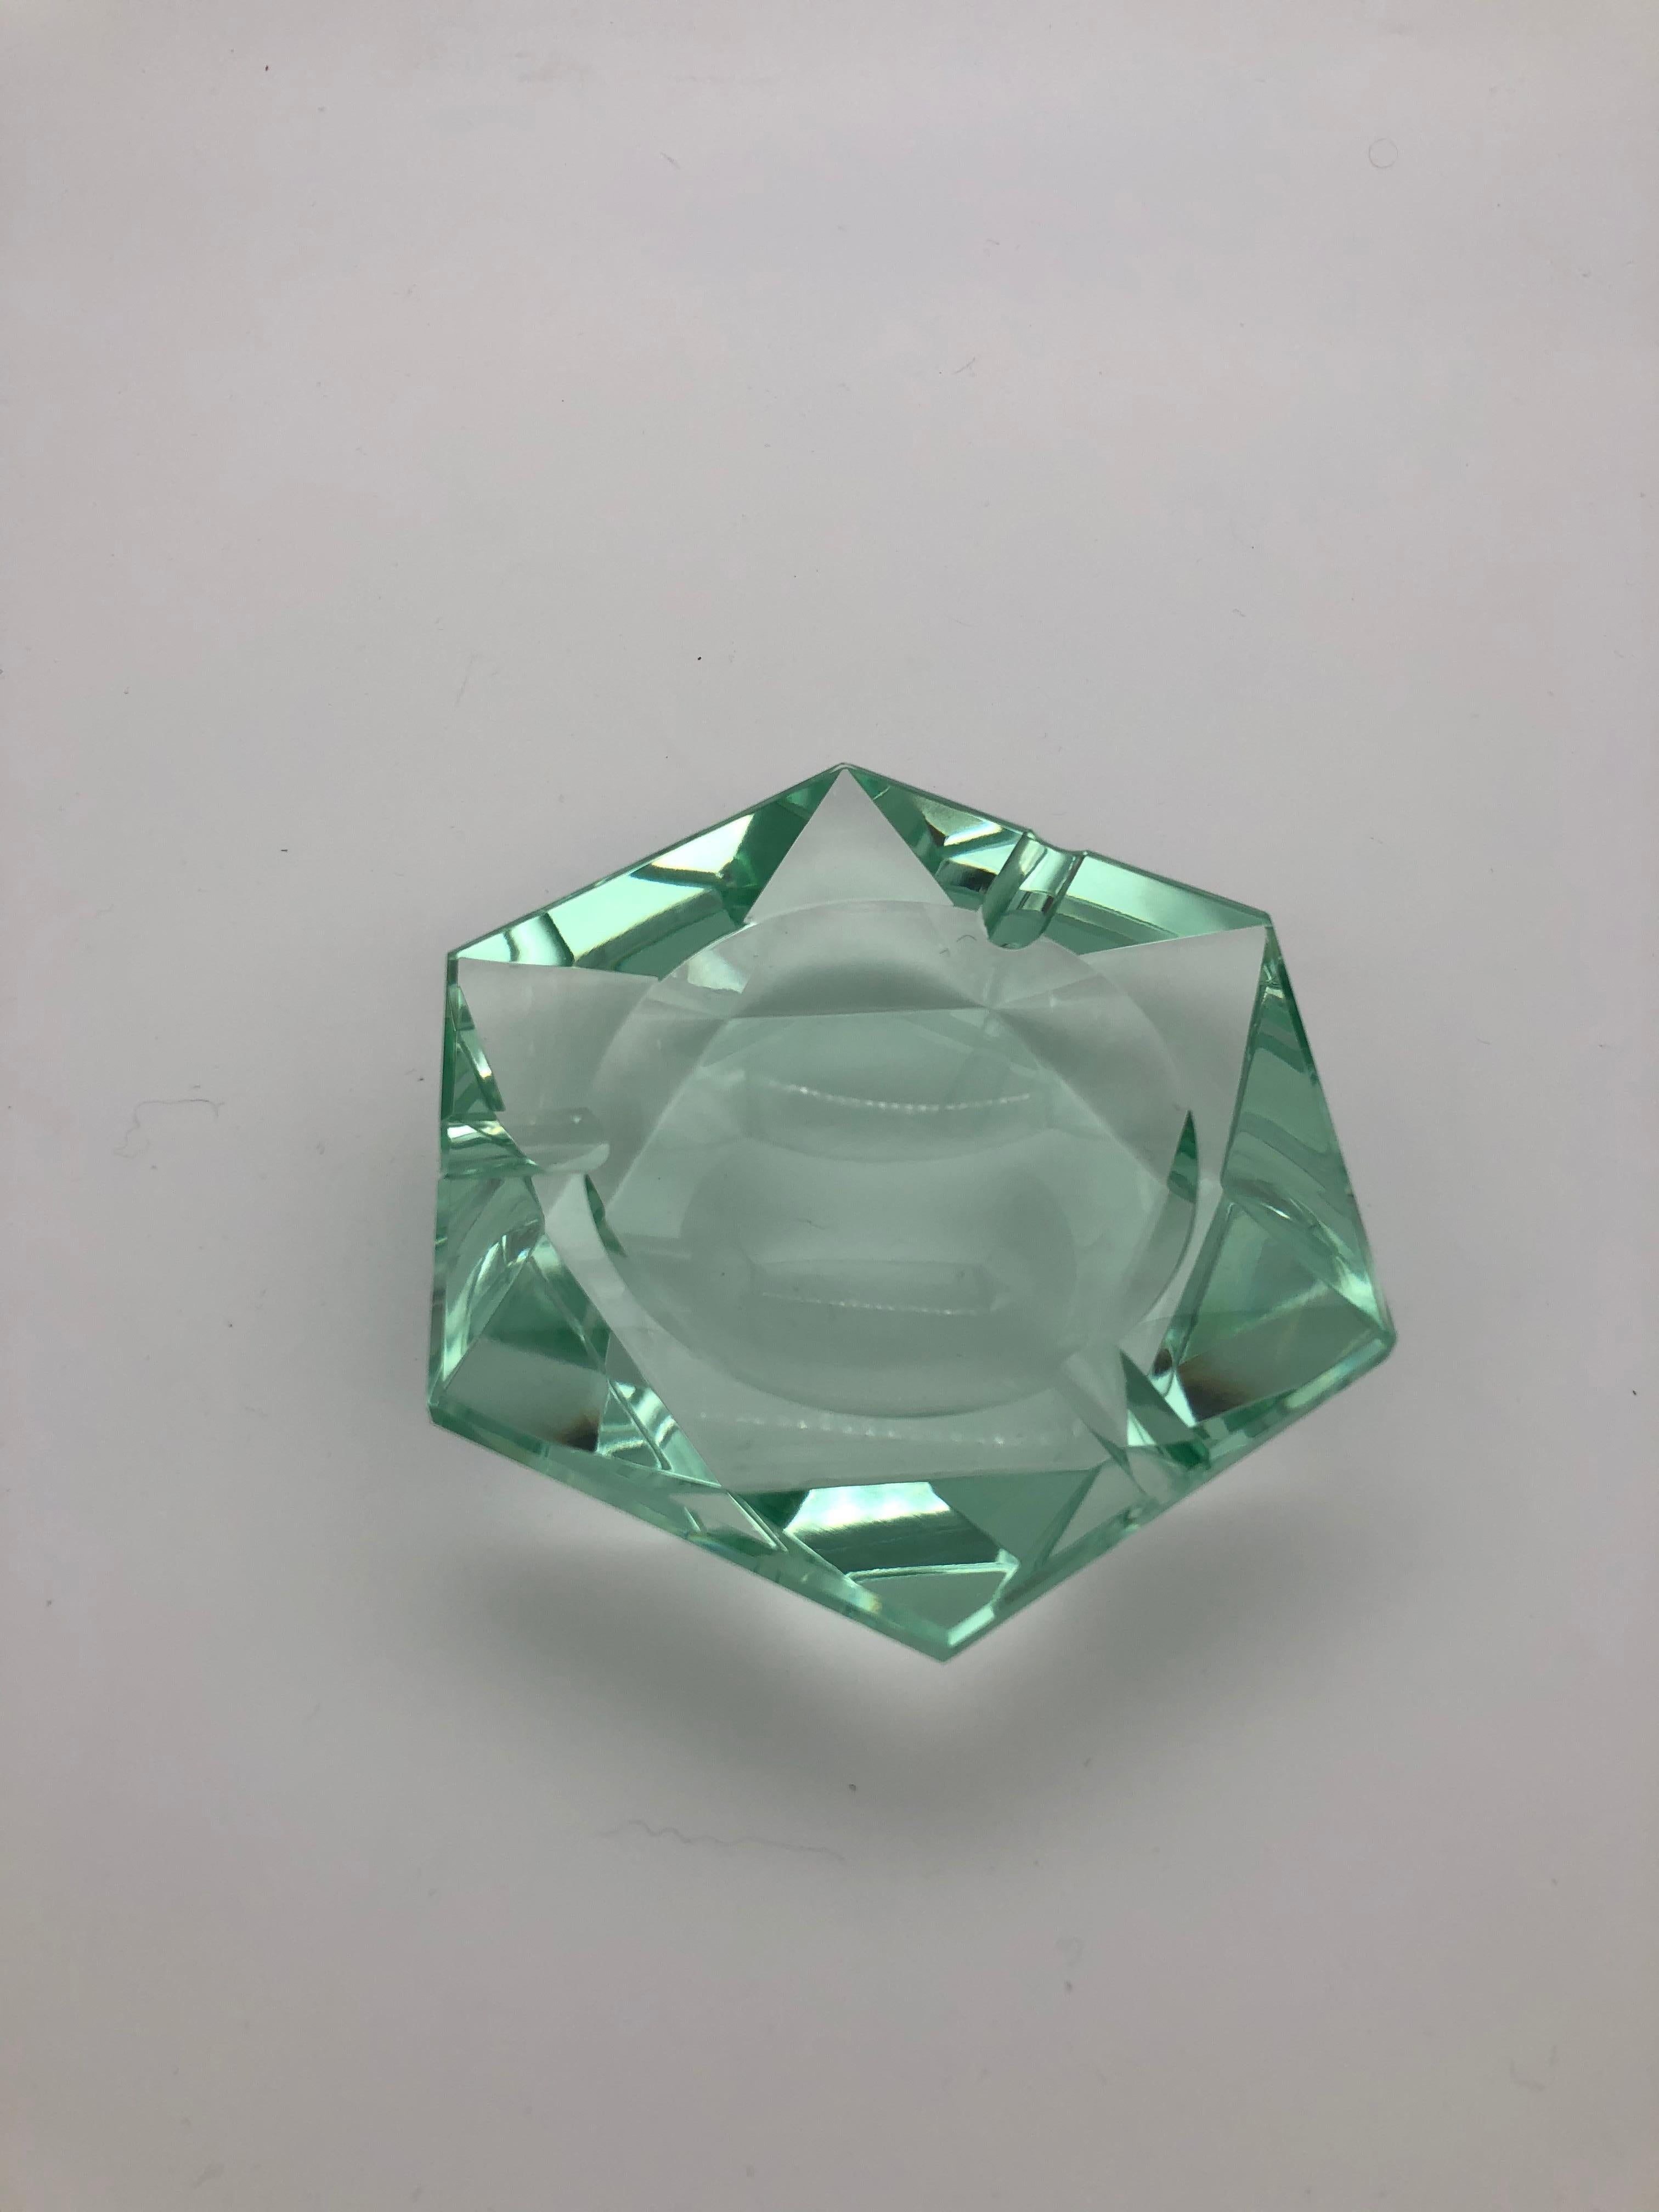 Beveled glass in the shape of a star.